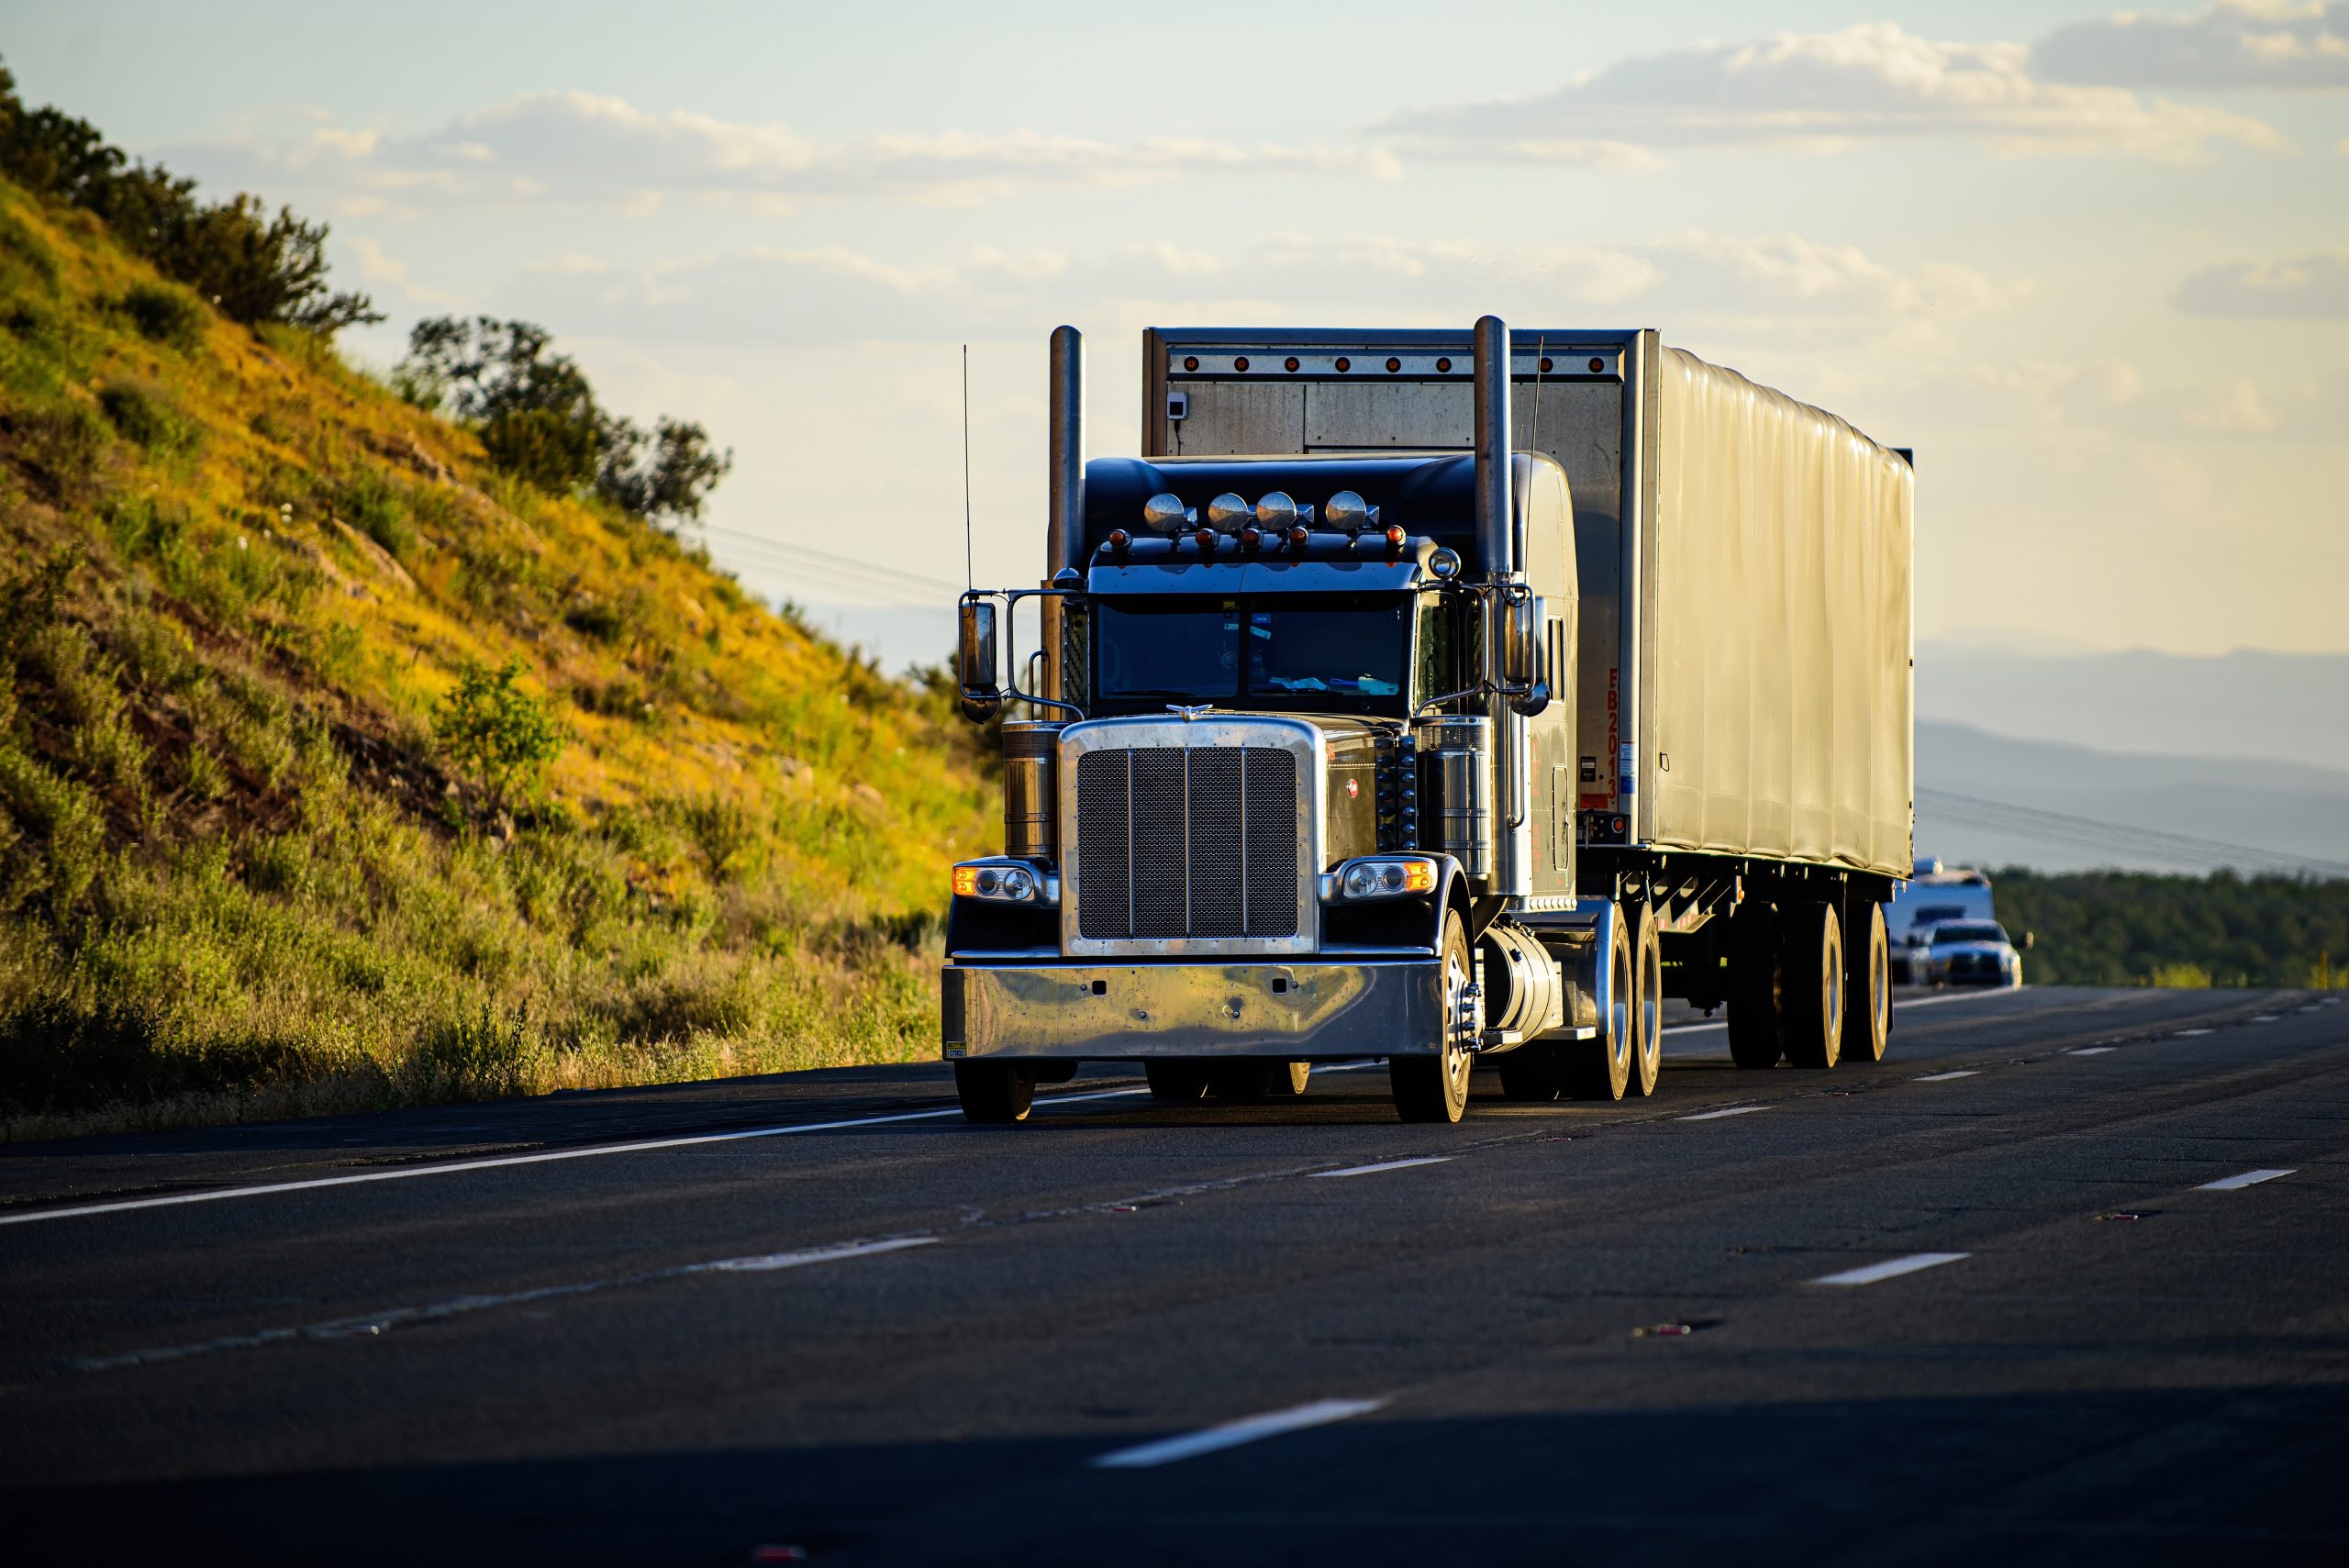 What are the hazards associated with long-haul truck drivers